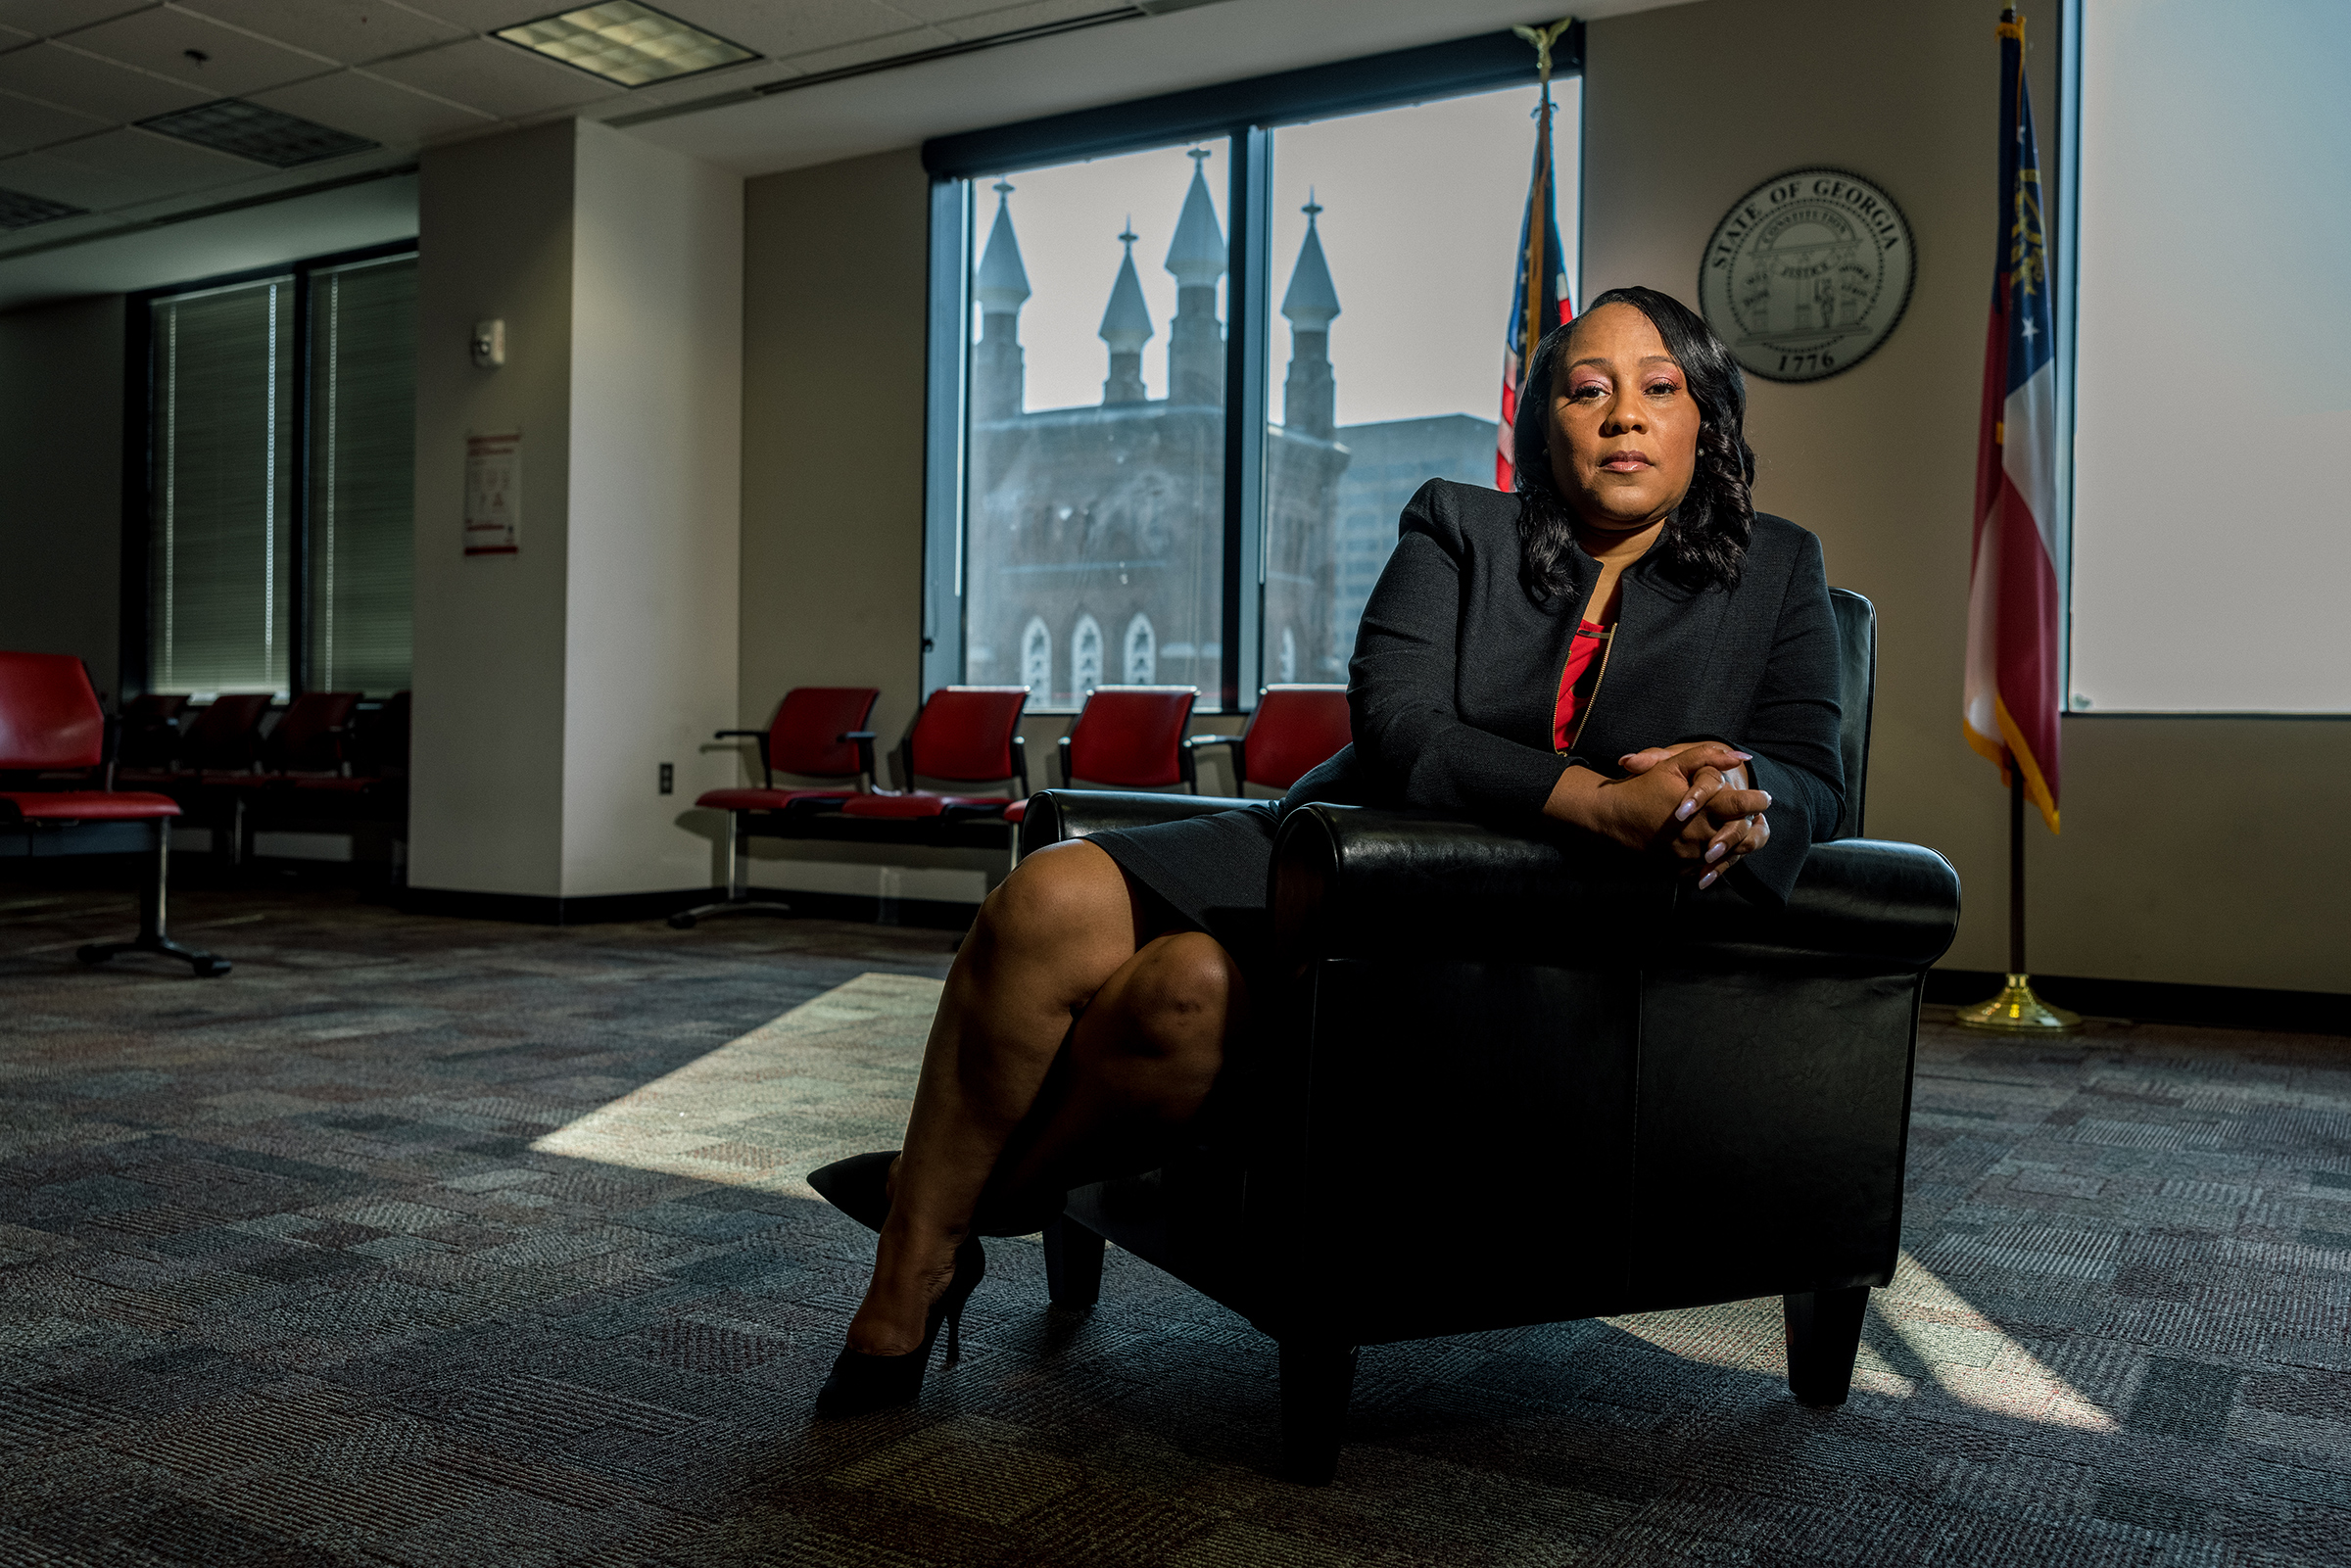 District Attorney Fani Willis at the Fulton County Courthouse on Aug. 14. (Lynsey Weatherspoon for TIME)